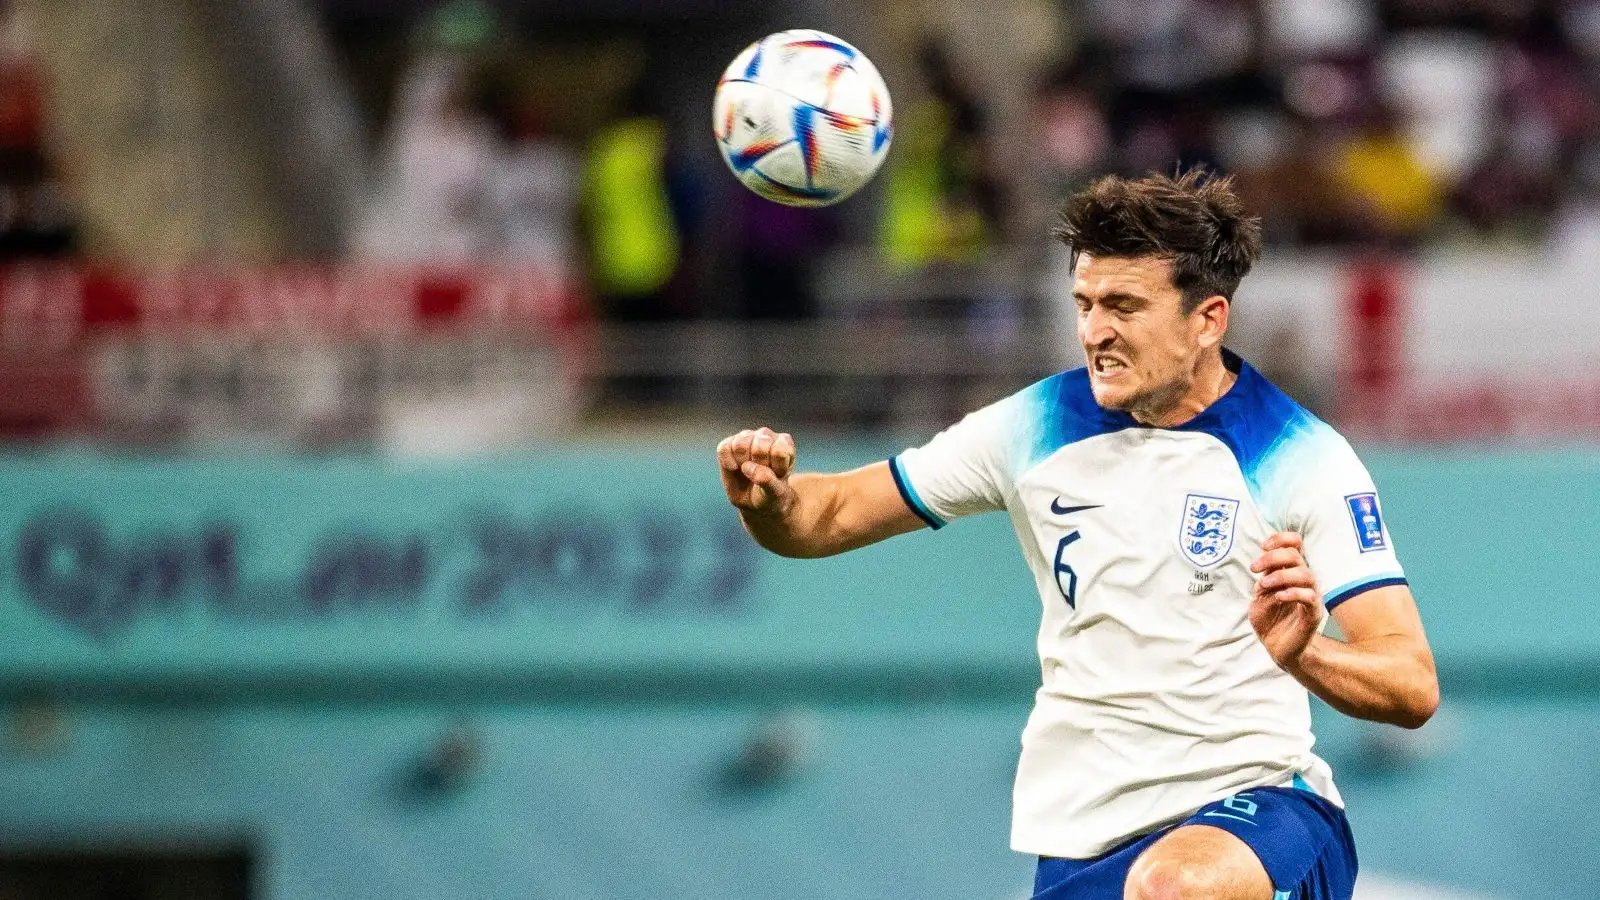 England defender Harry Maguire heads the ball